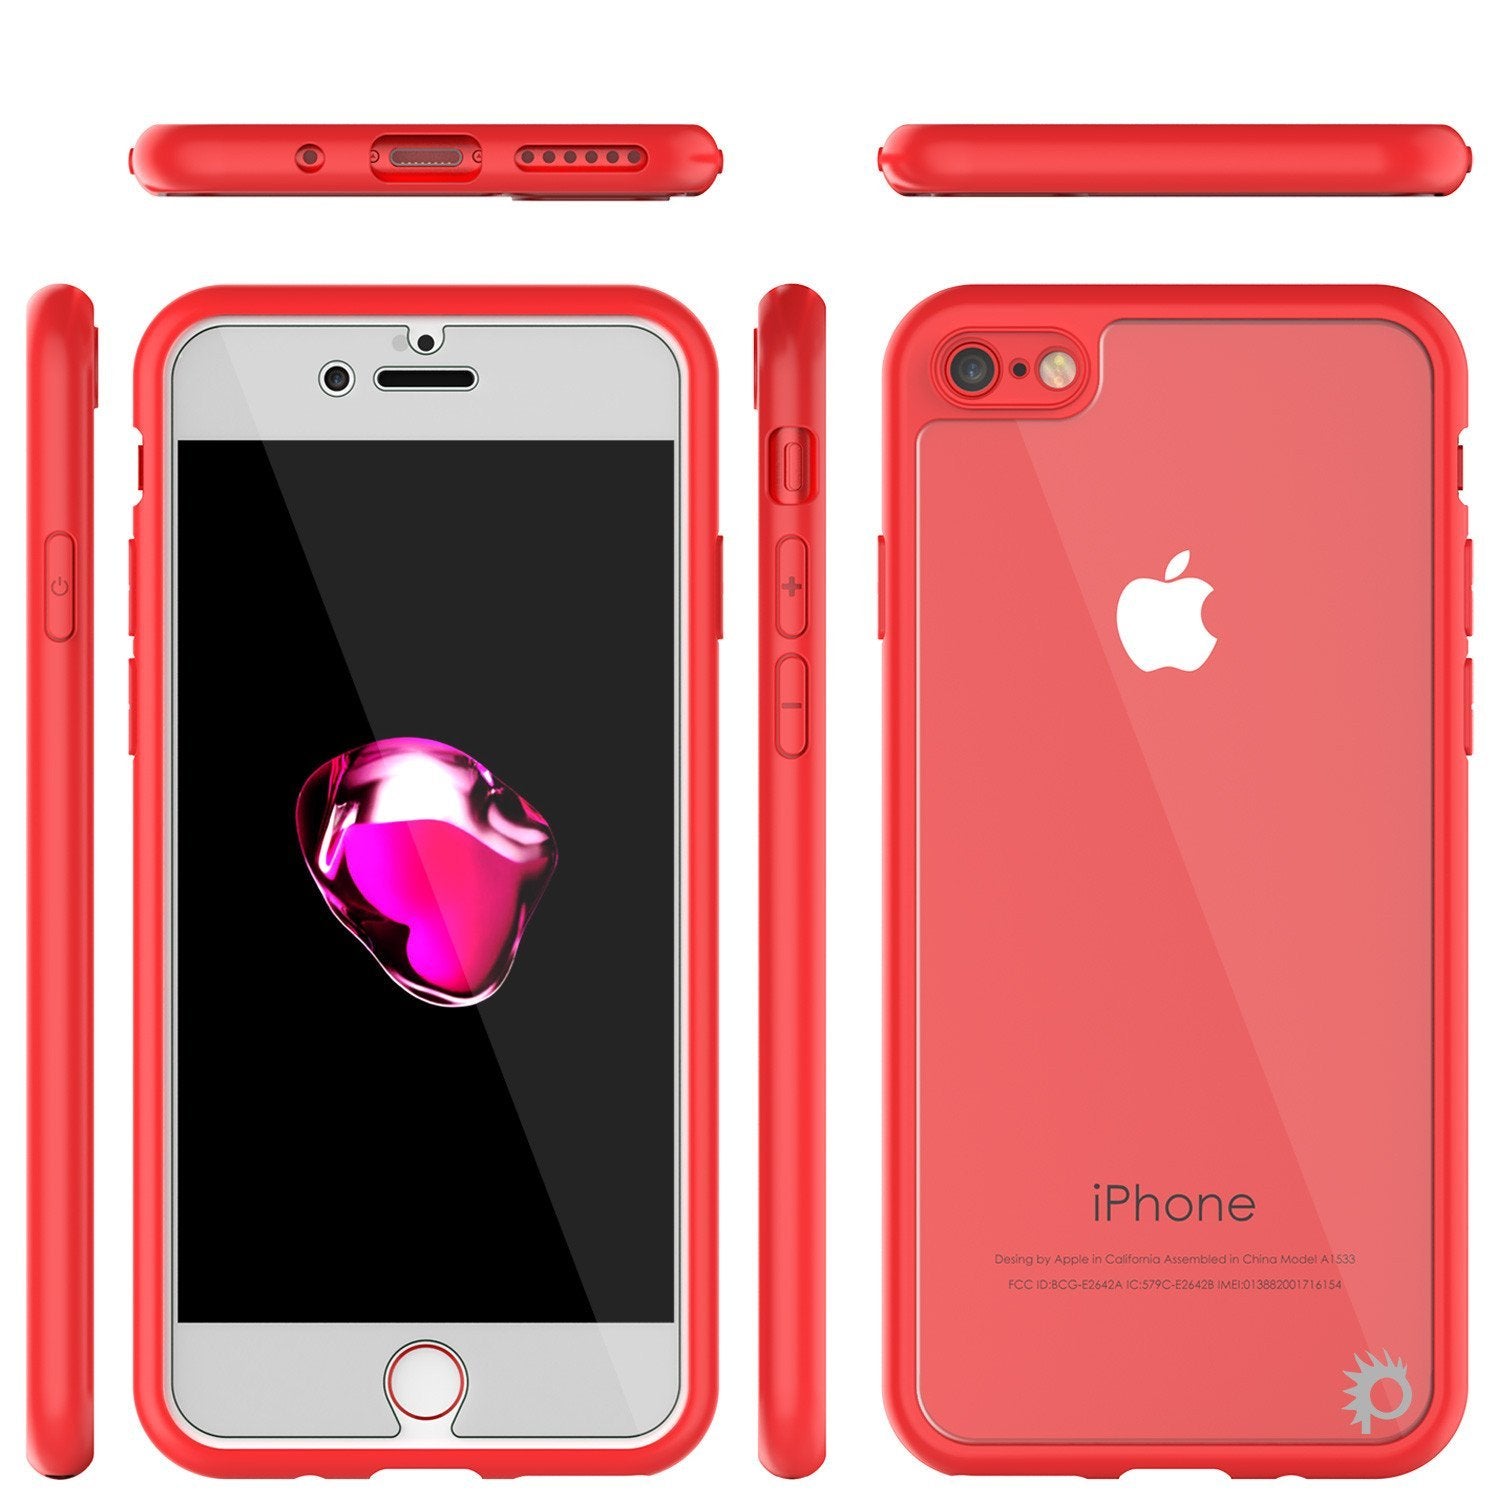 iPhone8 Case [MASK Series] [RED] Full Body Hybrid Dual Layer TPU Cover W/ protective Tempered Glass Screen Protector